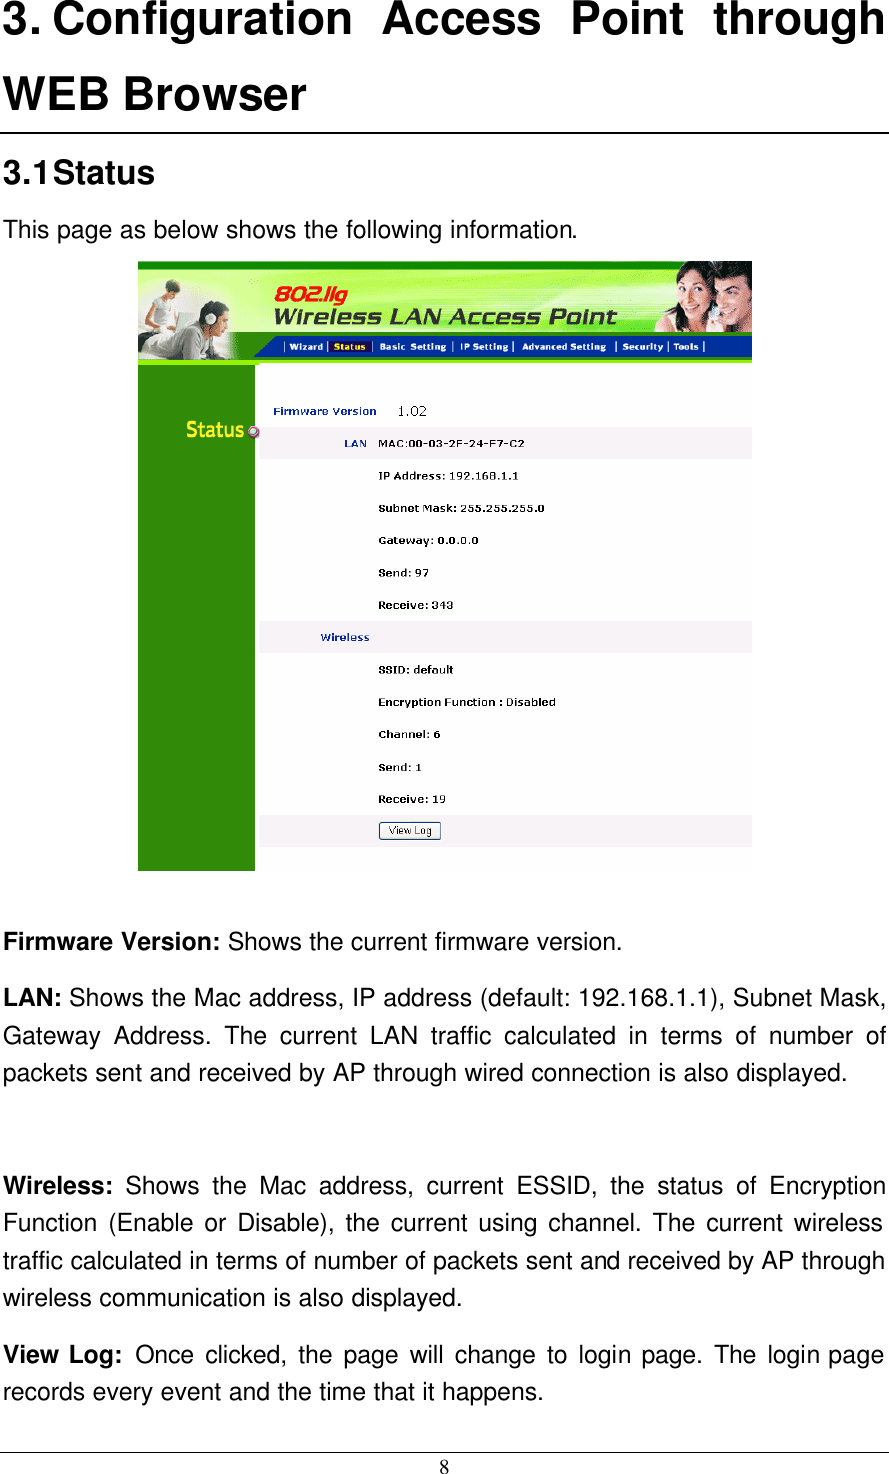  8 3. Configuration Access Point through WEB Browser 3.1 Status This page as below shows the following information.   Firmware Version: Shows the current firmware version. LAN: Shows the Mac address, IP address (default: 192.168.1.1), Subnet Mask, Gateway Address. The current LAN traffic calculated in terms of number of packets sent and received by AP through wired connection is also displayed.  Wireless:  Shows the Mac address, current ESSID, the status of Encryption Function (Enable or Disable), the current using channel. The current wireless traffic calculated in terms of number of packets sent and received by AP through wireless communication is also displayed. View Log: Once clicked, the page will change to login page. The login page records every event and the time that it happens. 